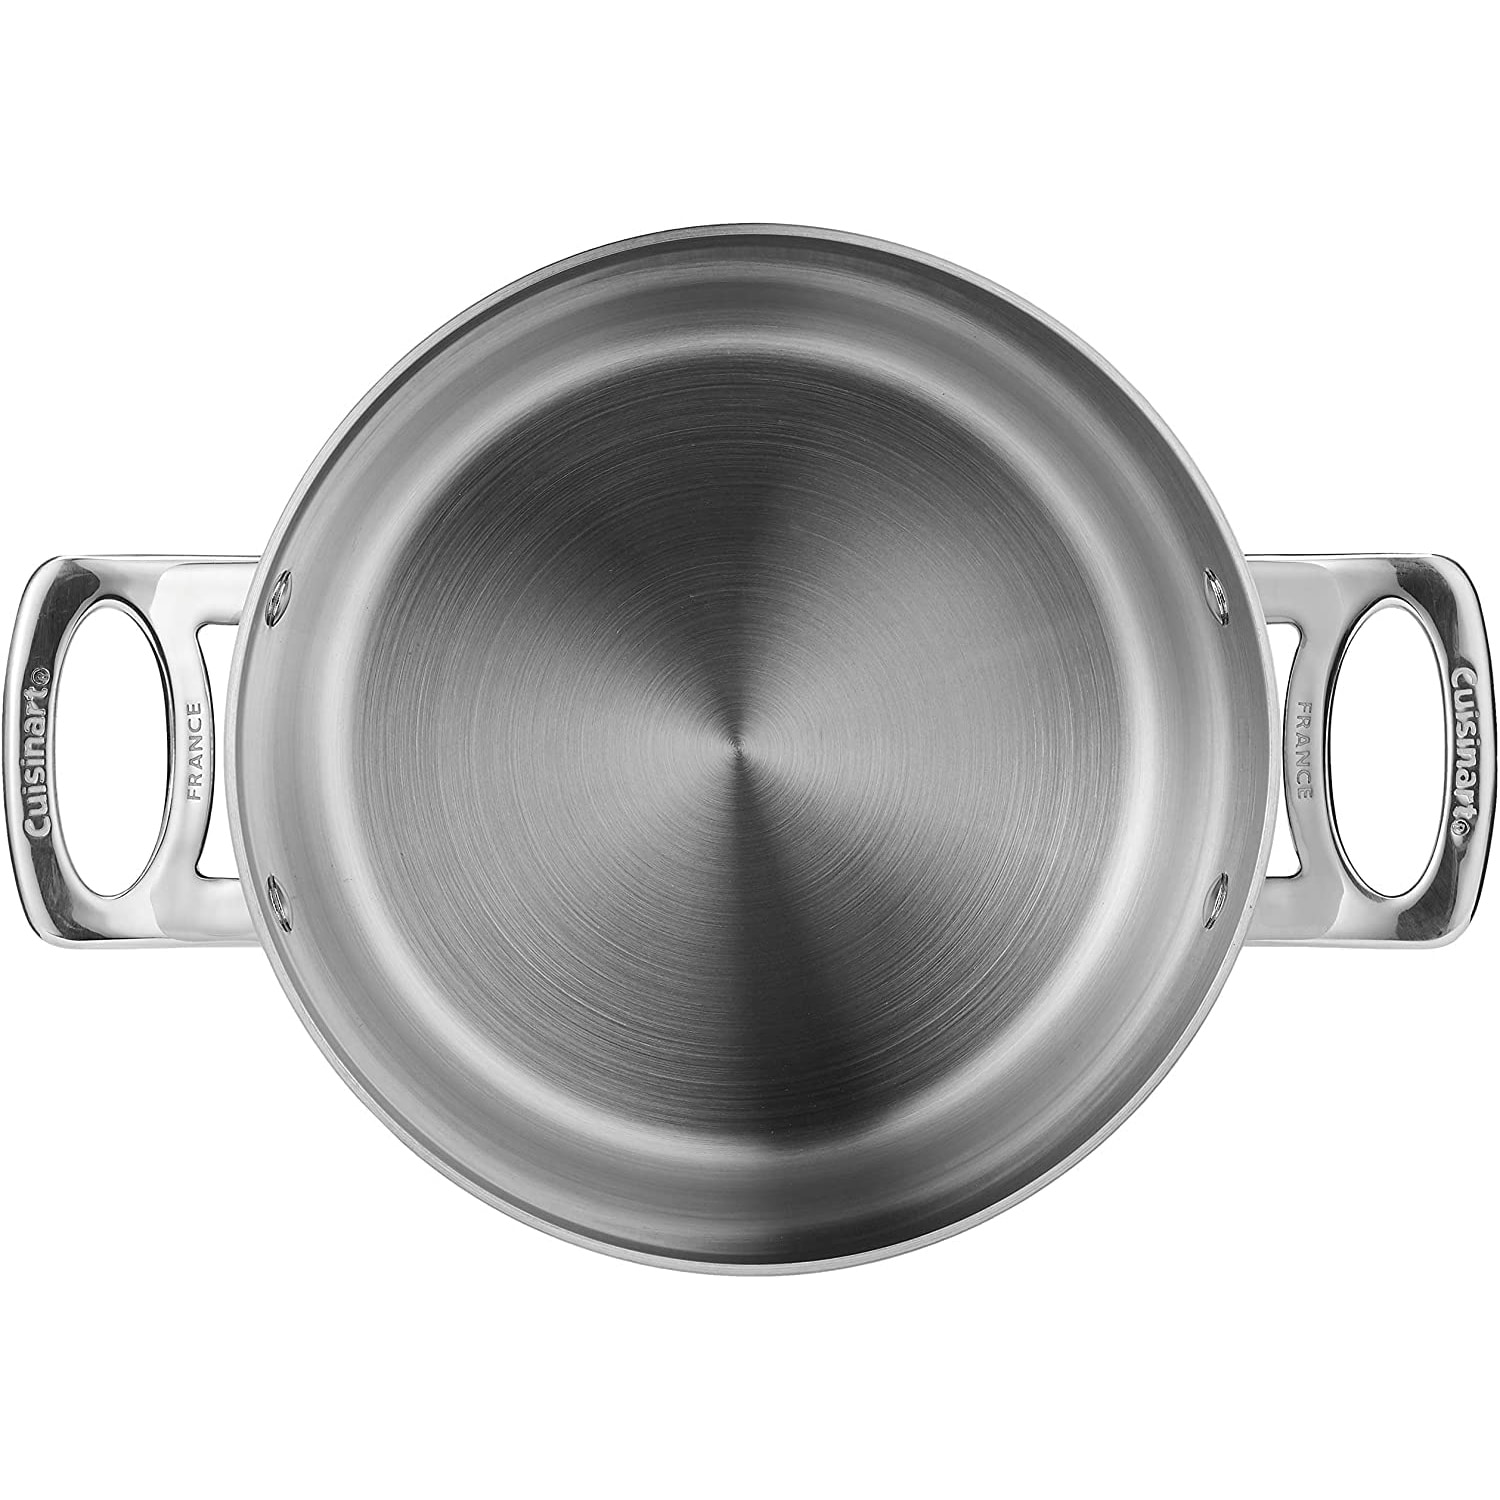 https://ak1.ostkcdn.com/images/products/is/images/direct/6292dea4b6800fac17f7fe64515862e6e6fbe452/Cuisinart-French-Classic-TriPly-Stainless-6-Quart-Stockpot-with-Cover.jpg